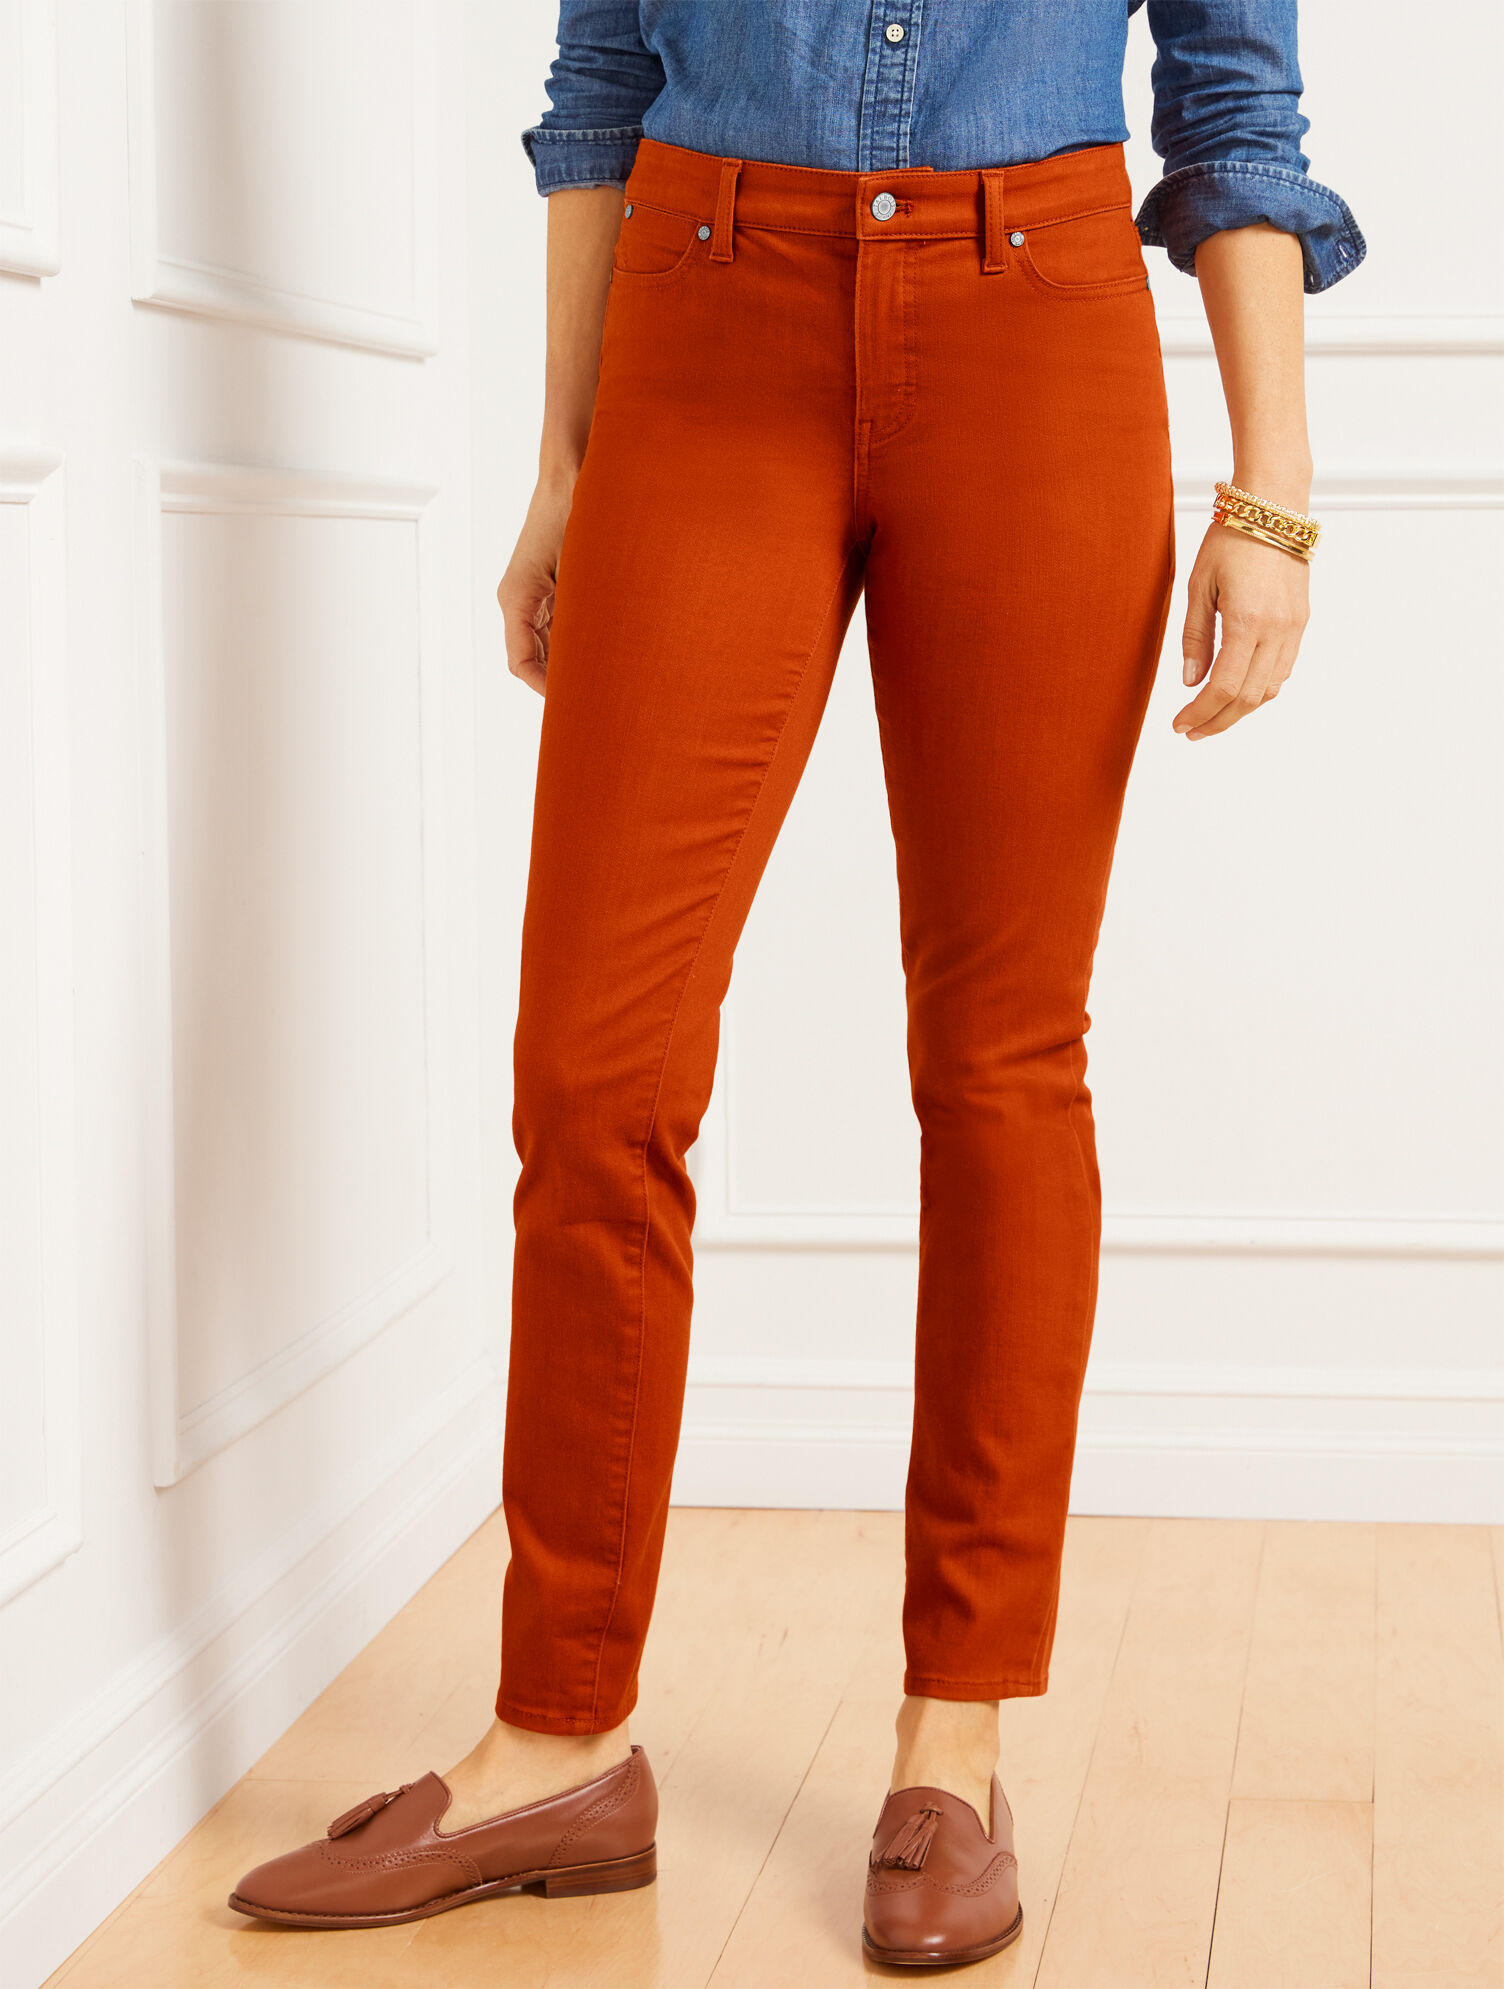 Colorful Women's Skinny Slim Fit Jeans